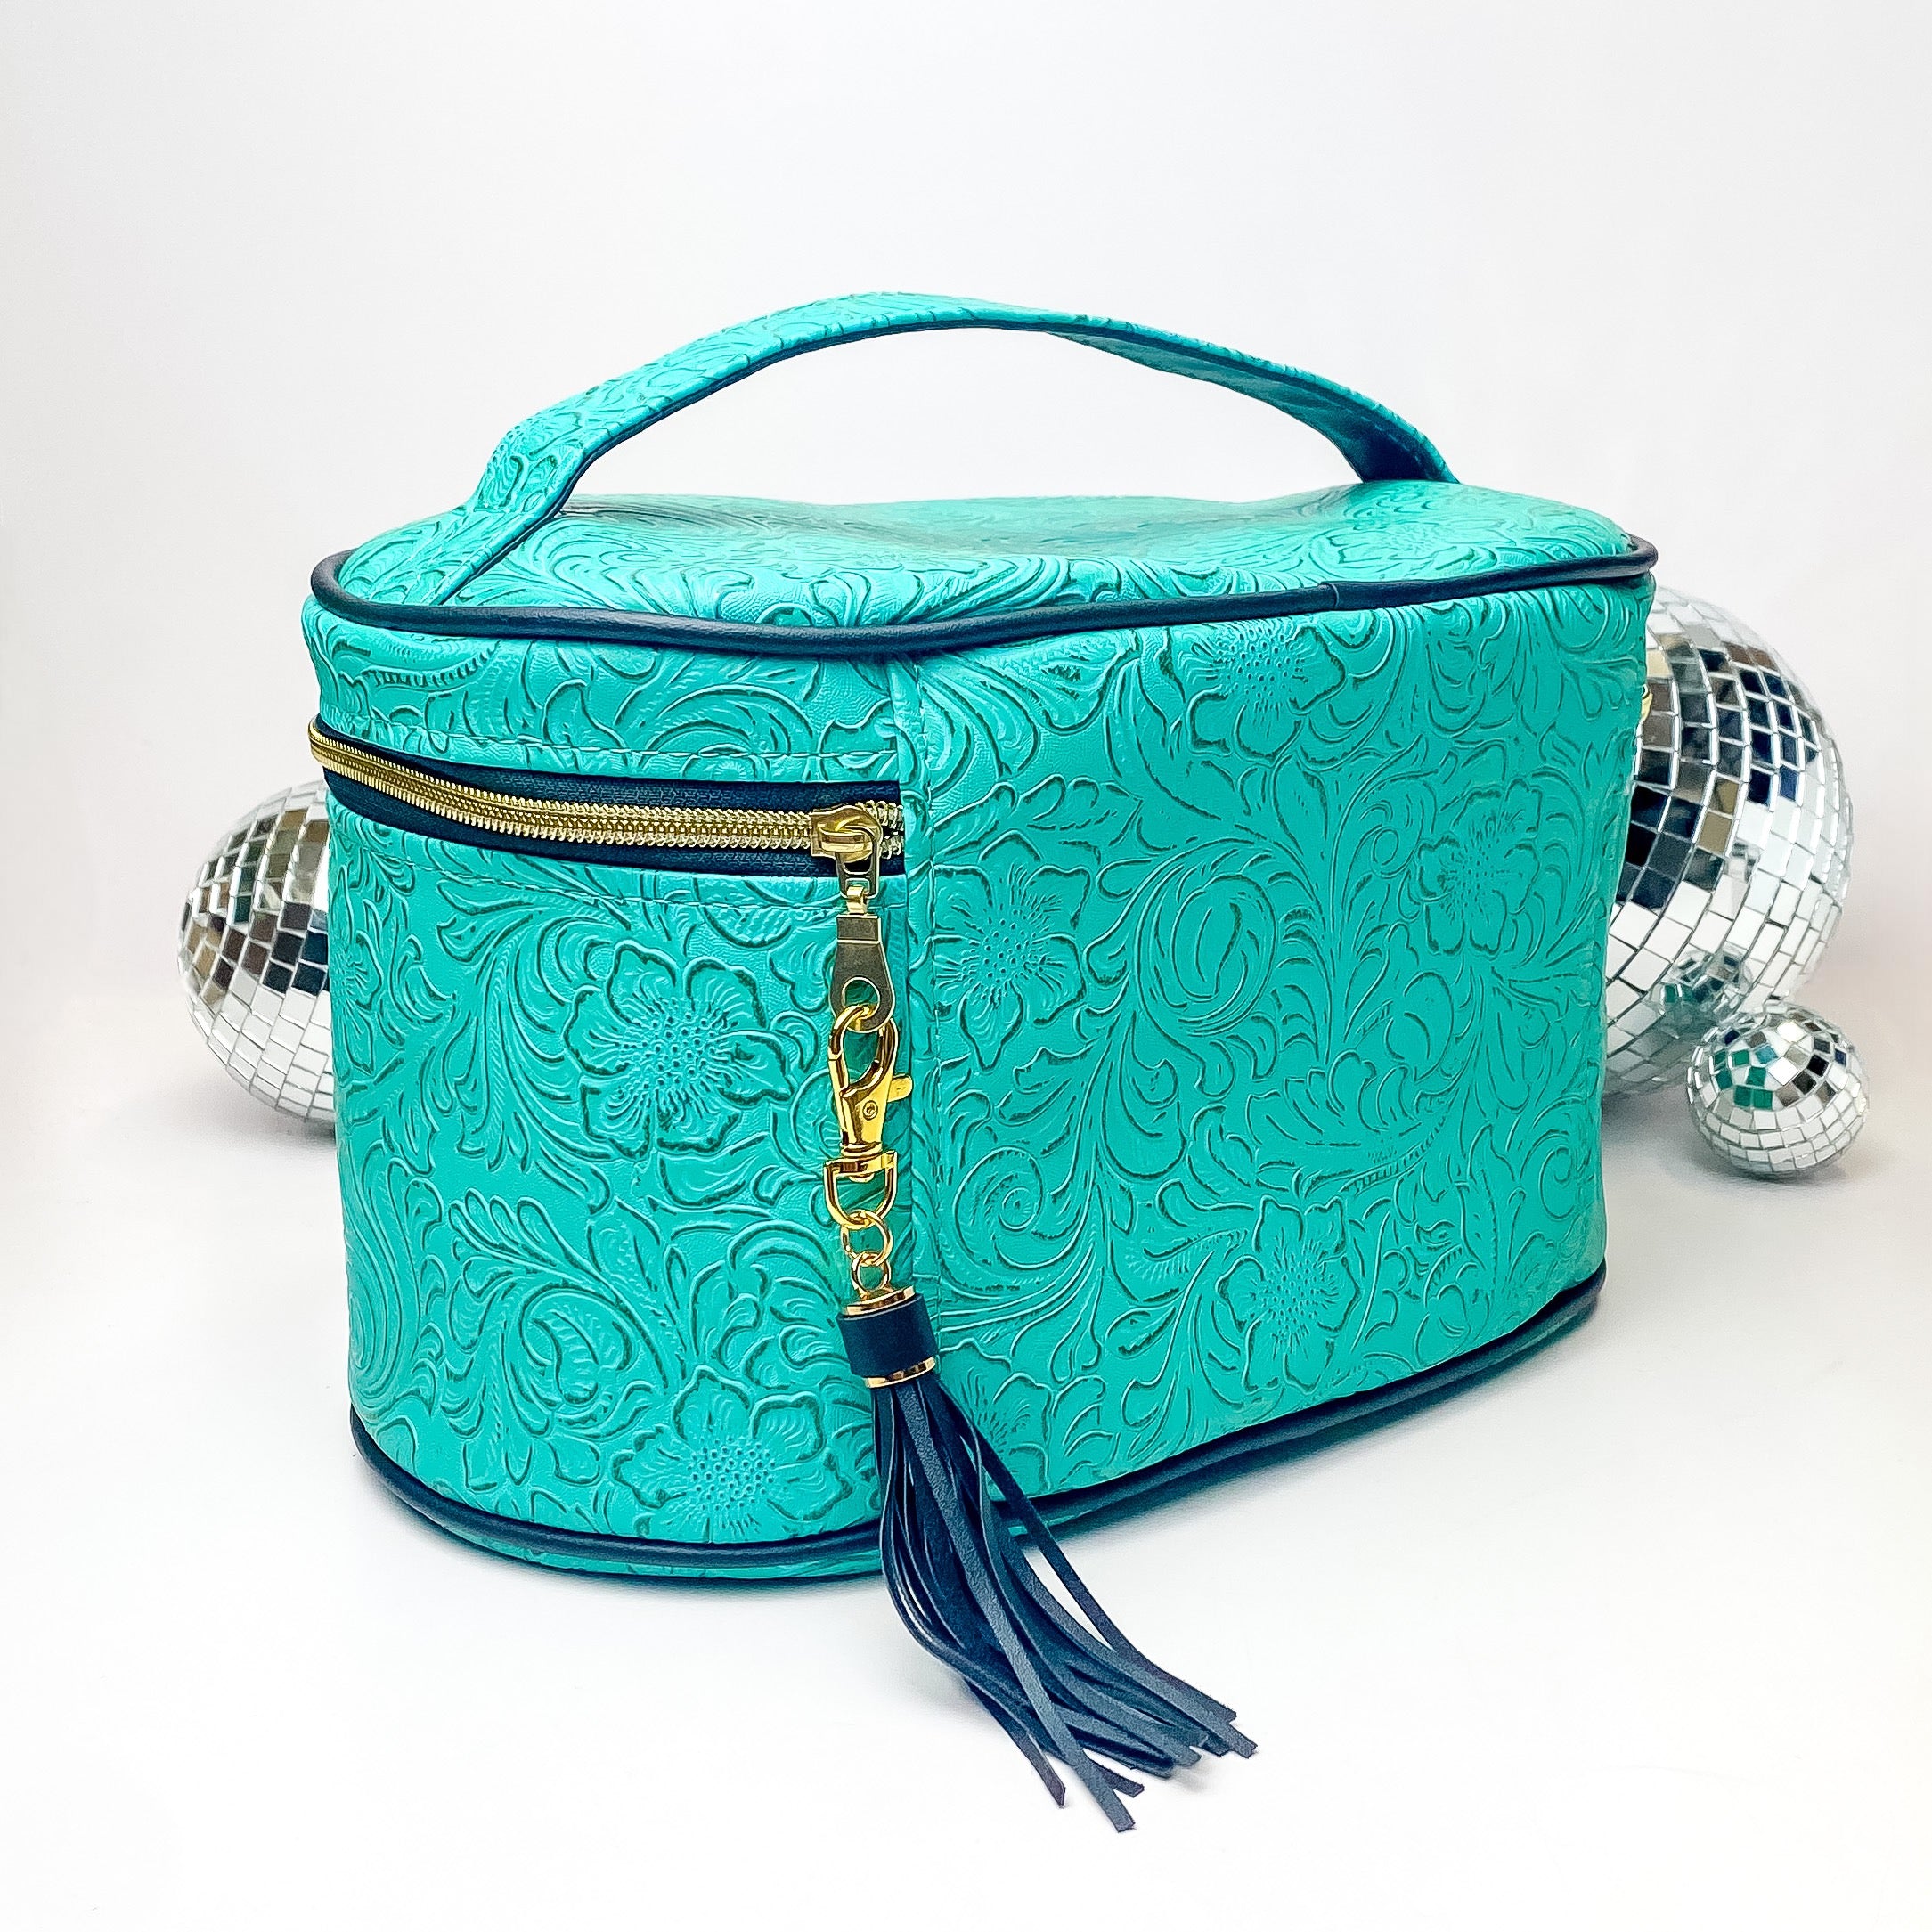 Makeup Junkie | Large Turquoise Dream Train Case in Turquoise Green Tooled Print - Giddy Up Glamour Boutique